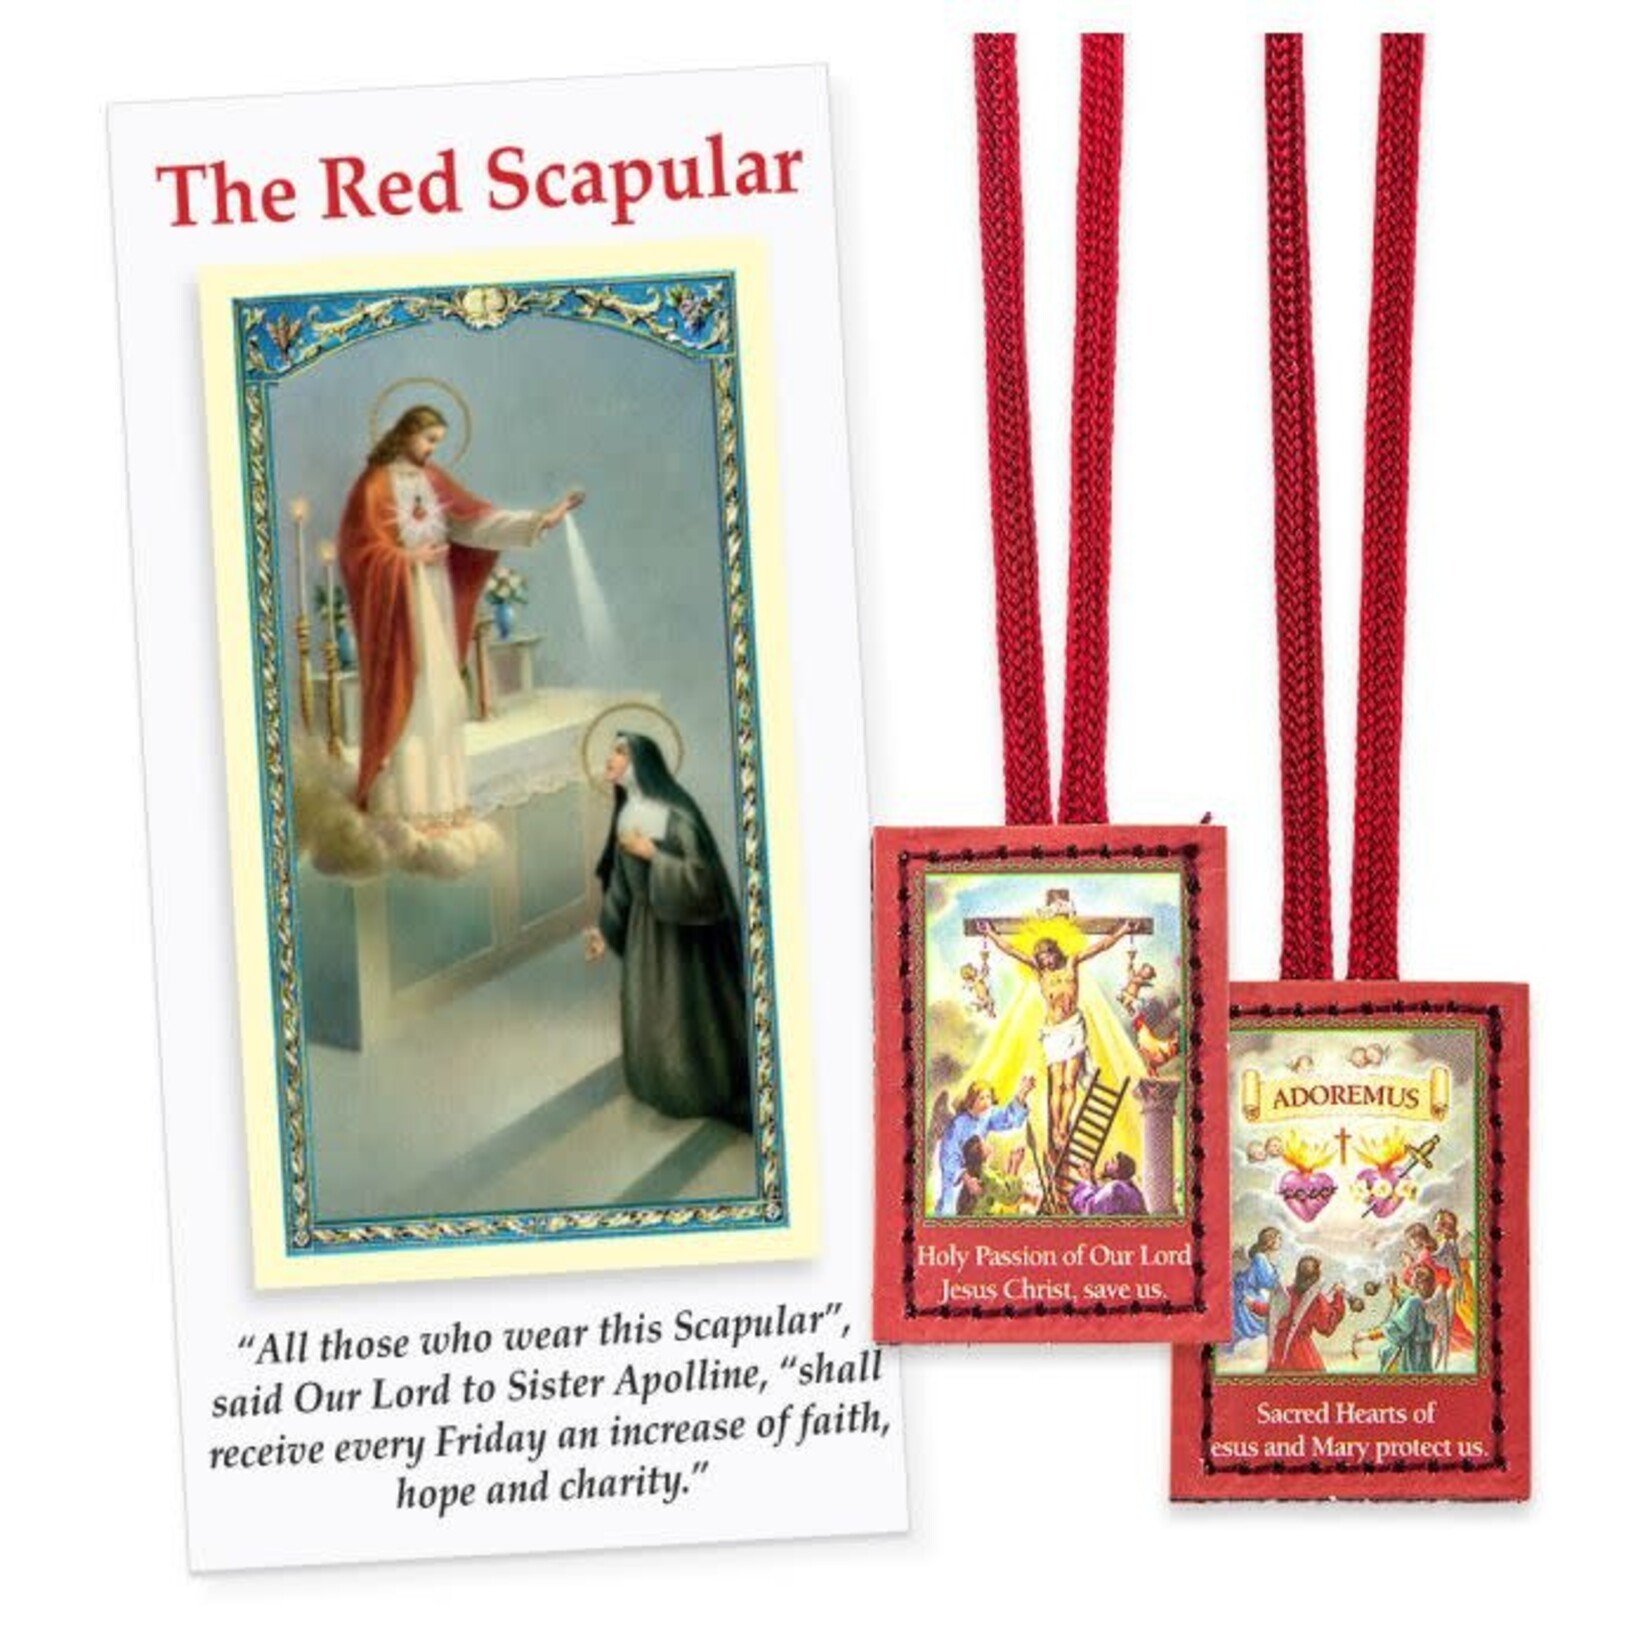 The Red Scapular